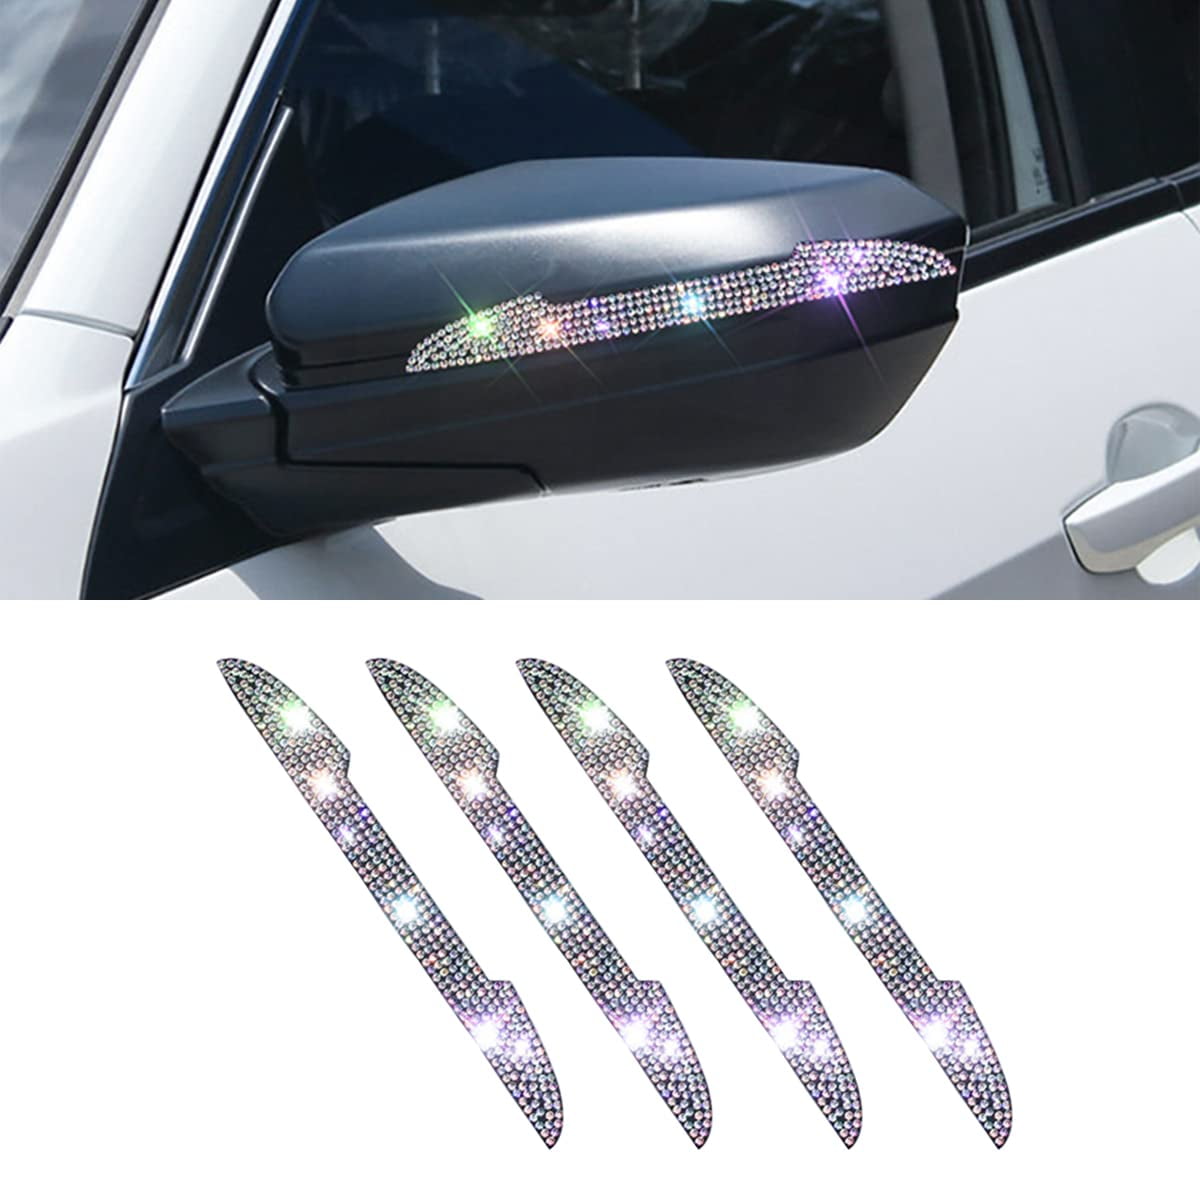 Door Protector with Silicone Protect PVC Side Rearview Mirror and Defender Protector Trim Guard Sticker 8 Pcs Car Door Edge Guards Fits for All Vehicles